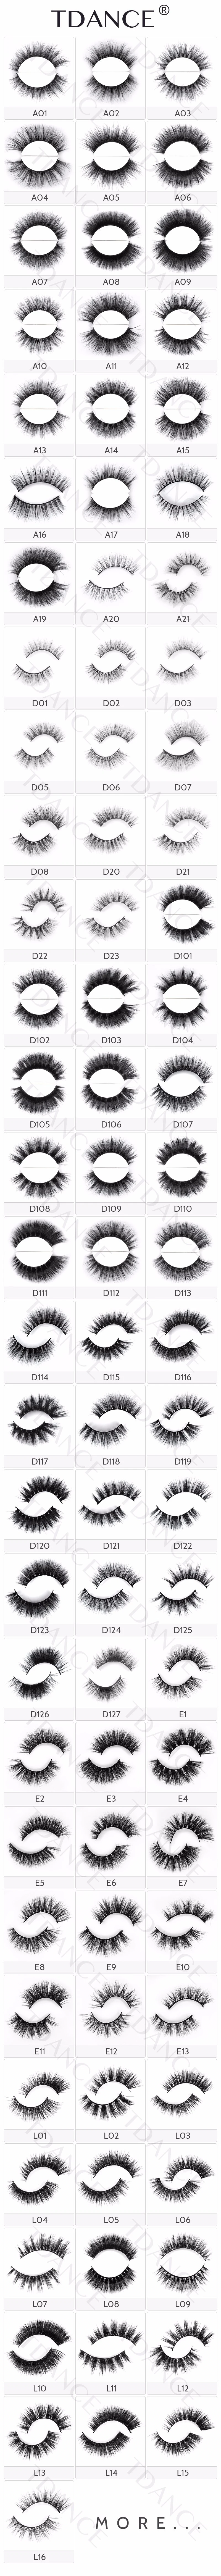 Hot Selling 25 mm 3D Mink Eyelashes Private Label Cruelty Free Mink Lashes